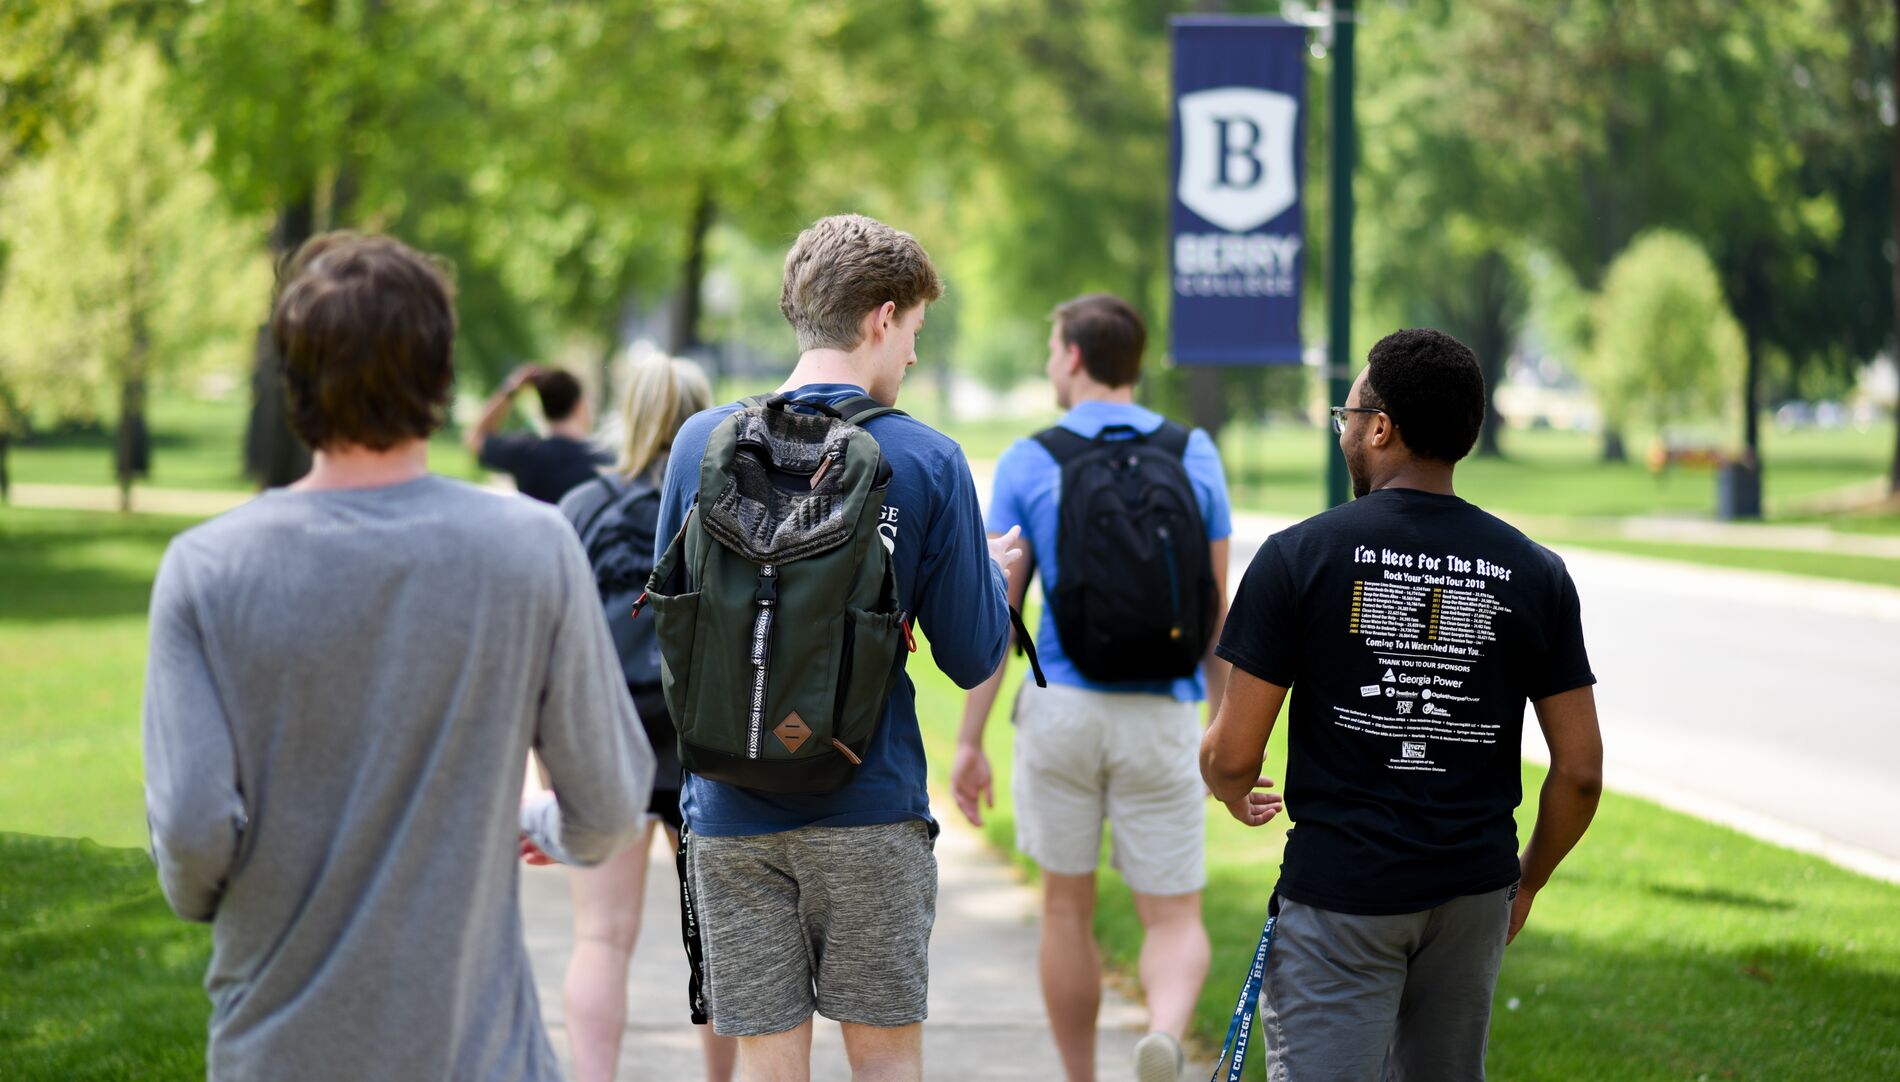             Berry Among Top Colleges with Economic Diversity     